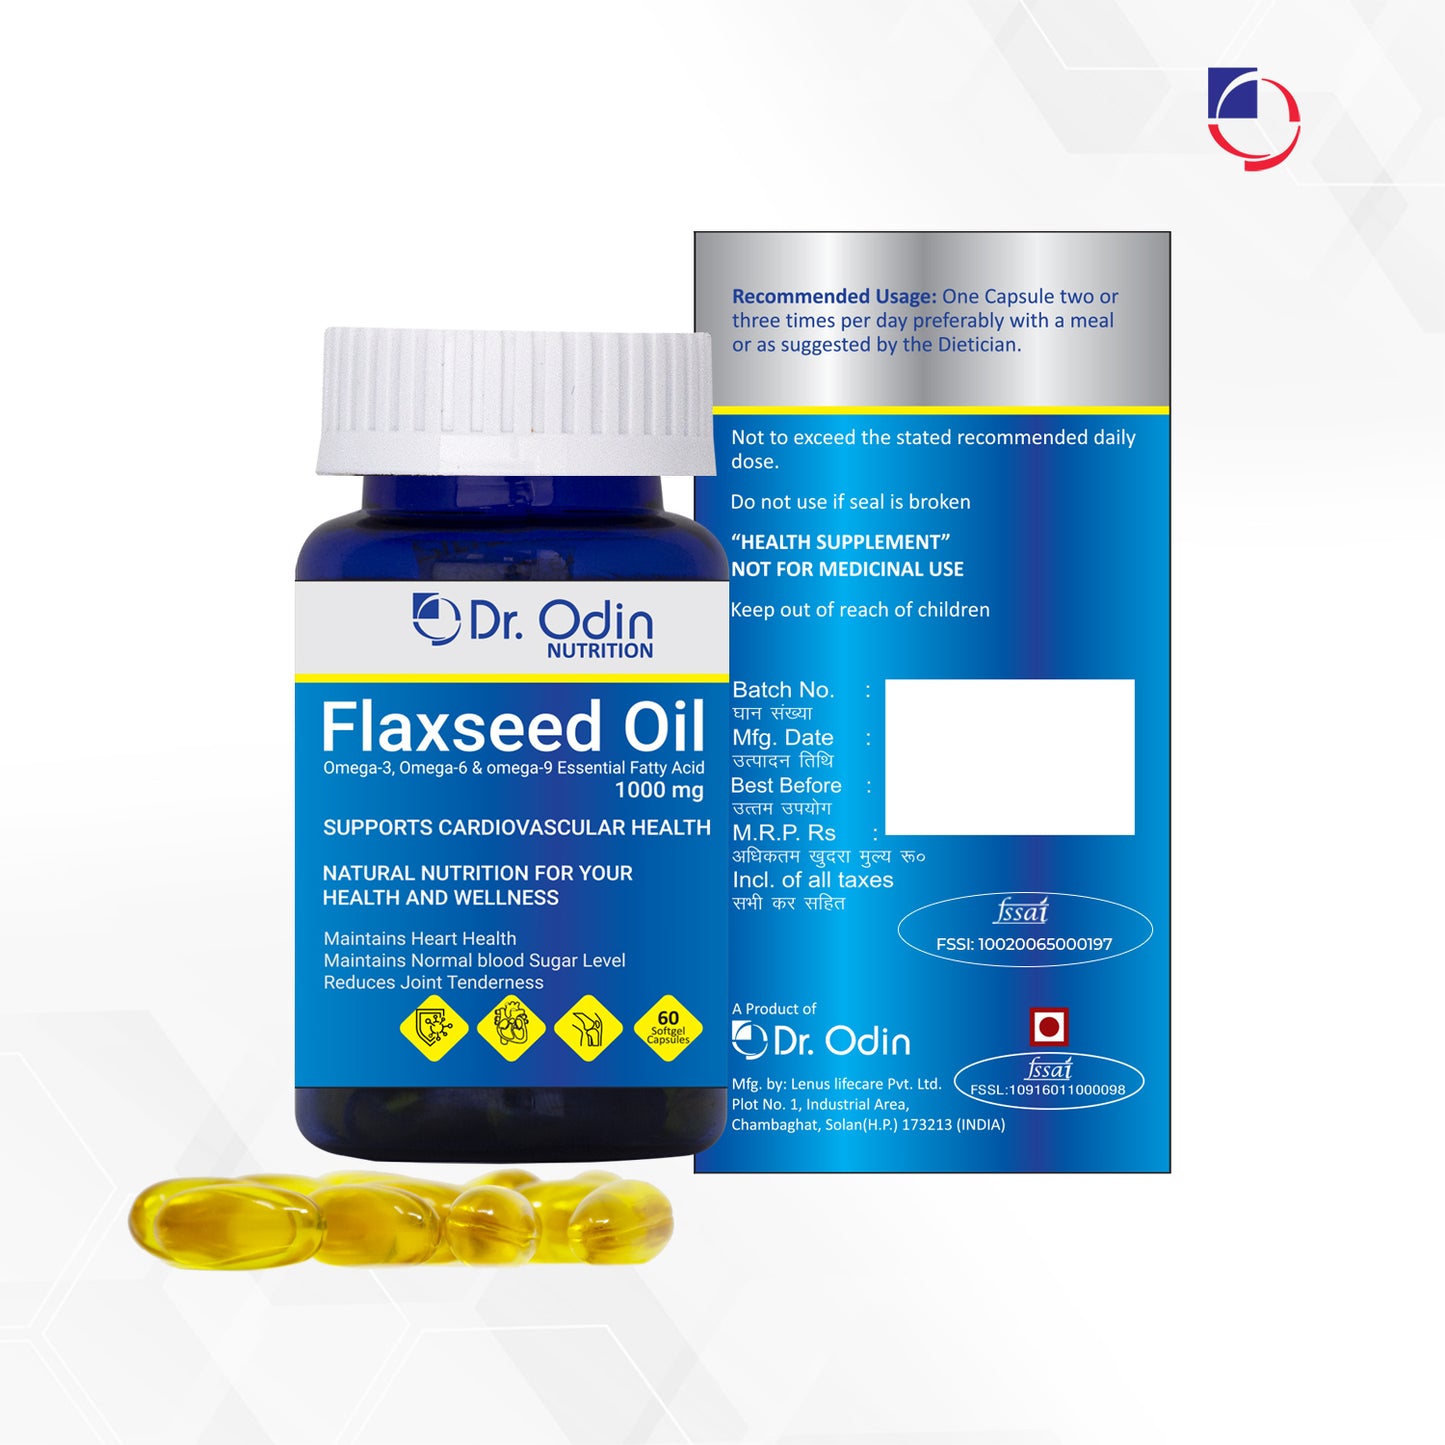 Supplements - Flaxseed Oil - 60 Count